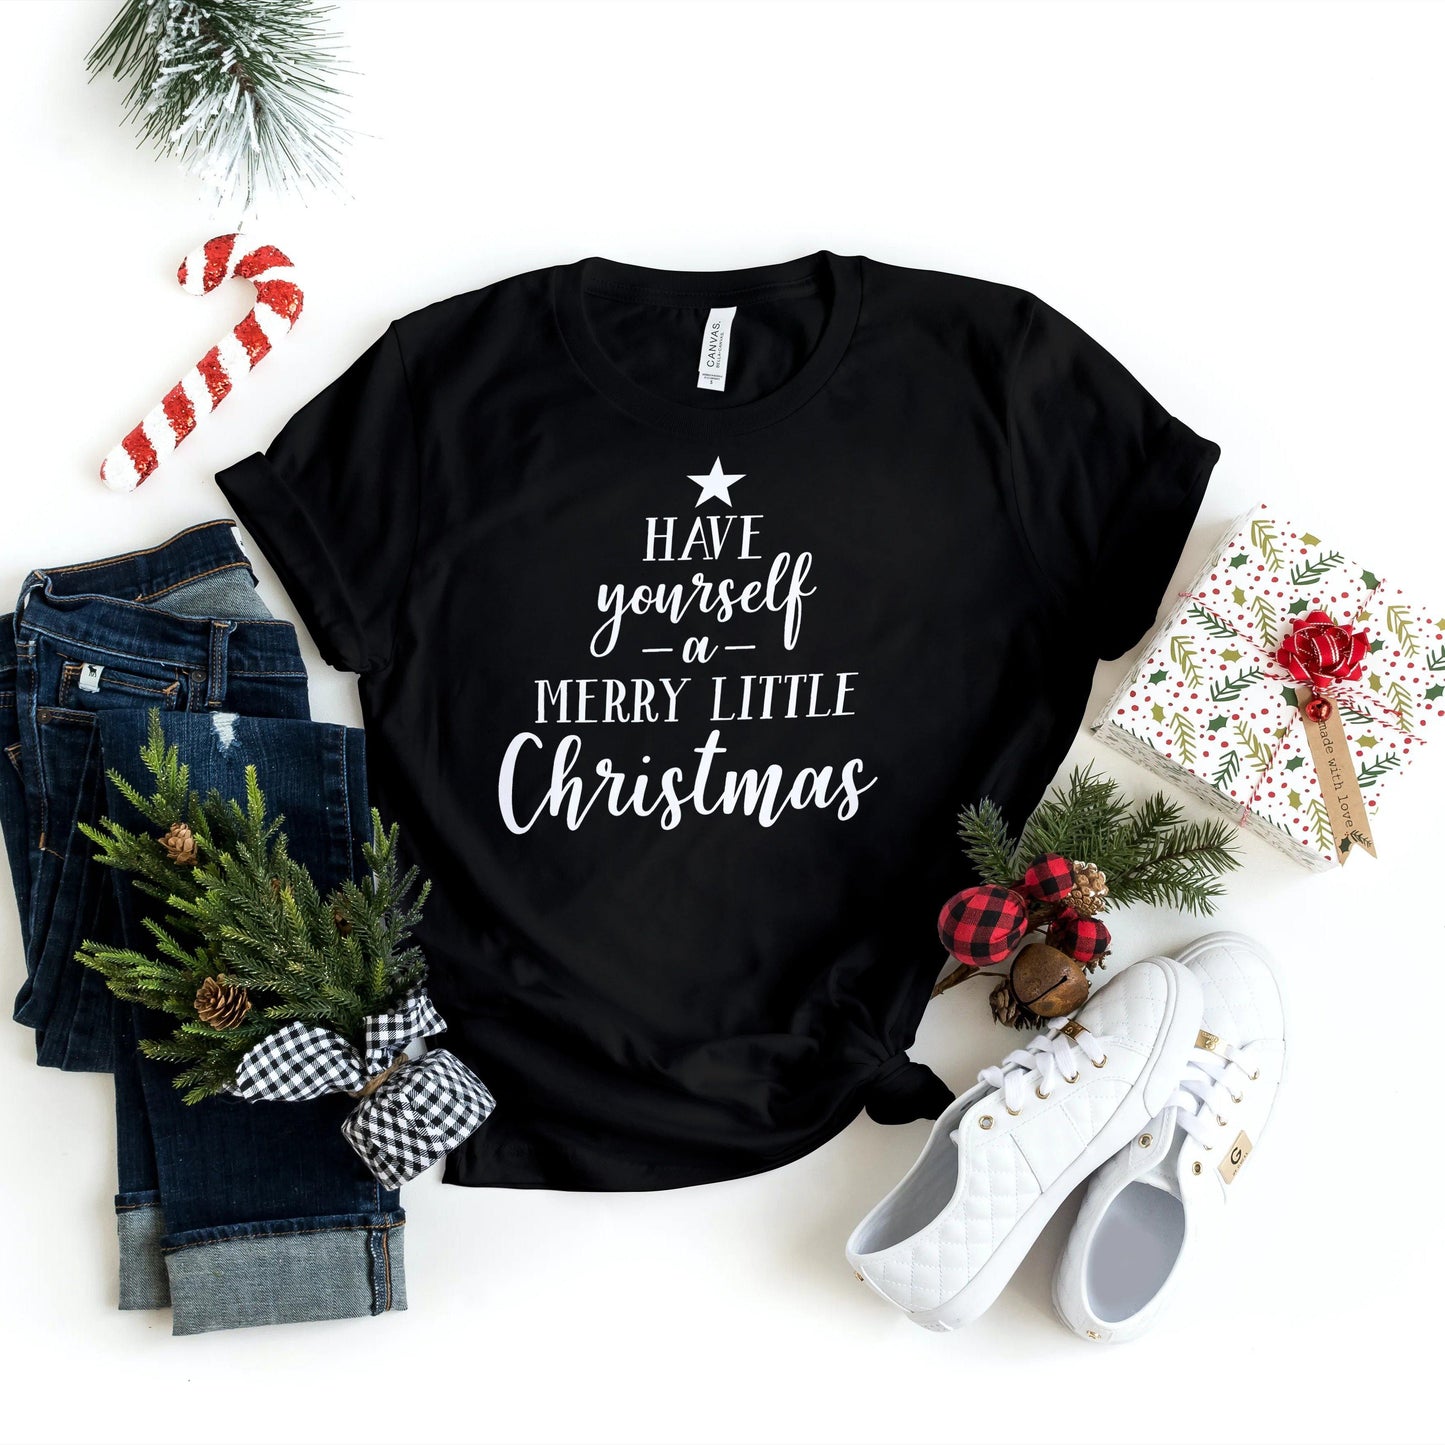 Christmas Shirts - Have Yourself a Merry Little Christmas - Holiday Shirts - Gifts - Healthy Wealthy Skinny